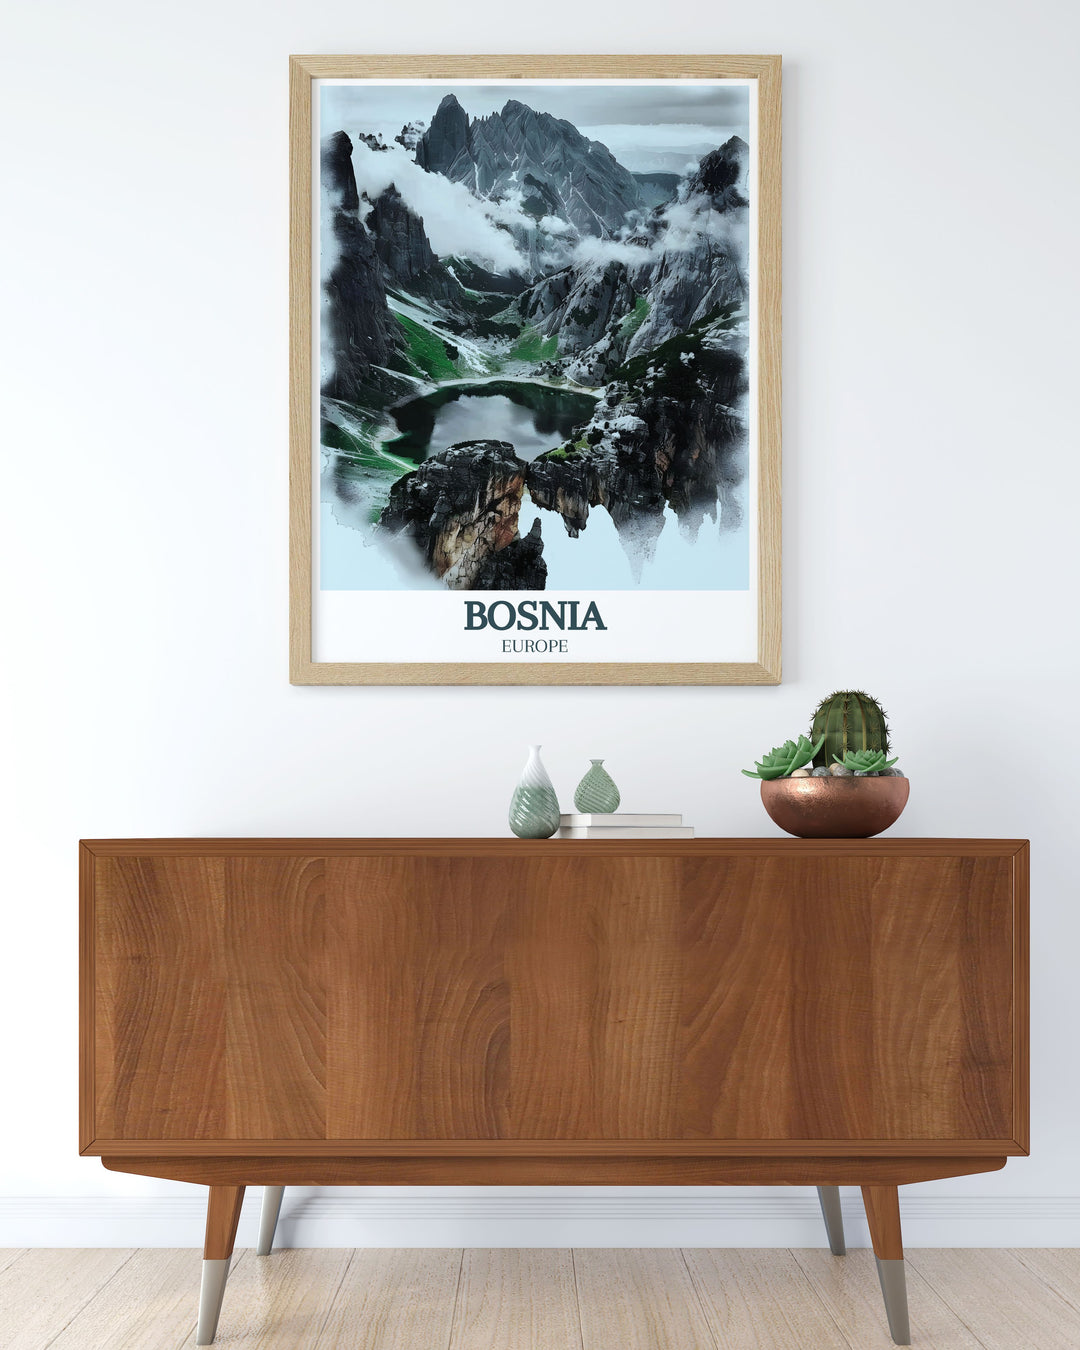 Elevate your home decor with this beautiful Bosnia Art Print of Sutjeska National Park, Maglić mountain, Trnovacko Lake. Each detail is rendered with precision offering a glimpse into Bosnias stunning natural landscape